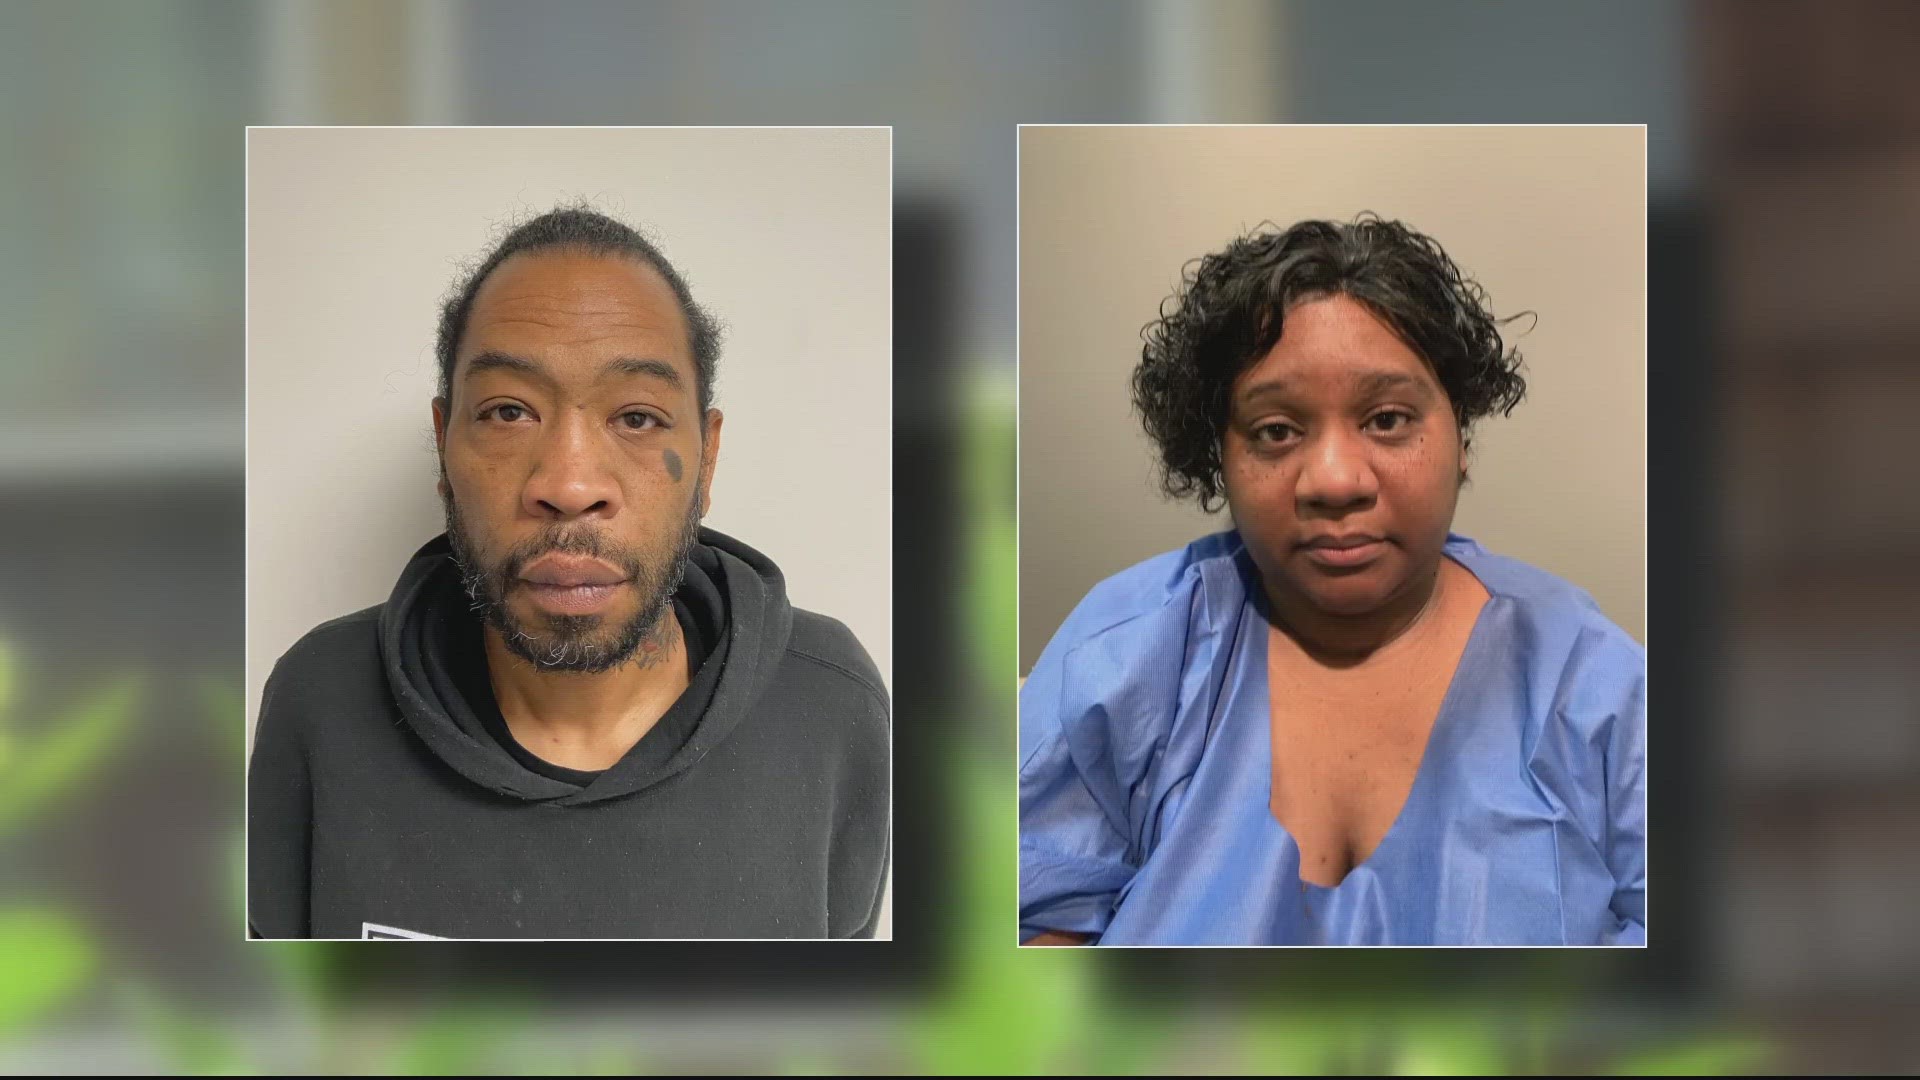 There were horrifying new details Thursday in the case of a Montgomery couple accused of murdering their disabled child through medical neglect.